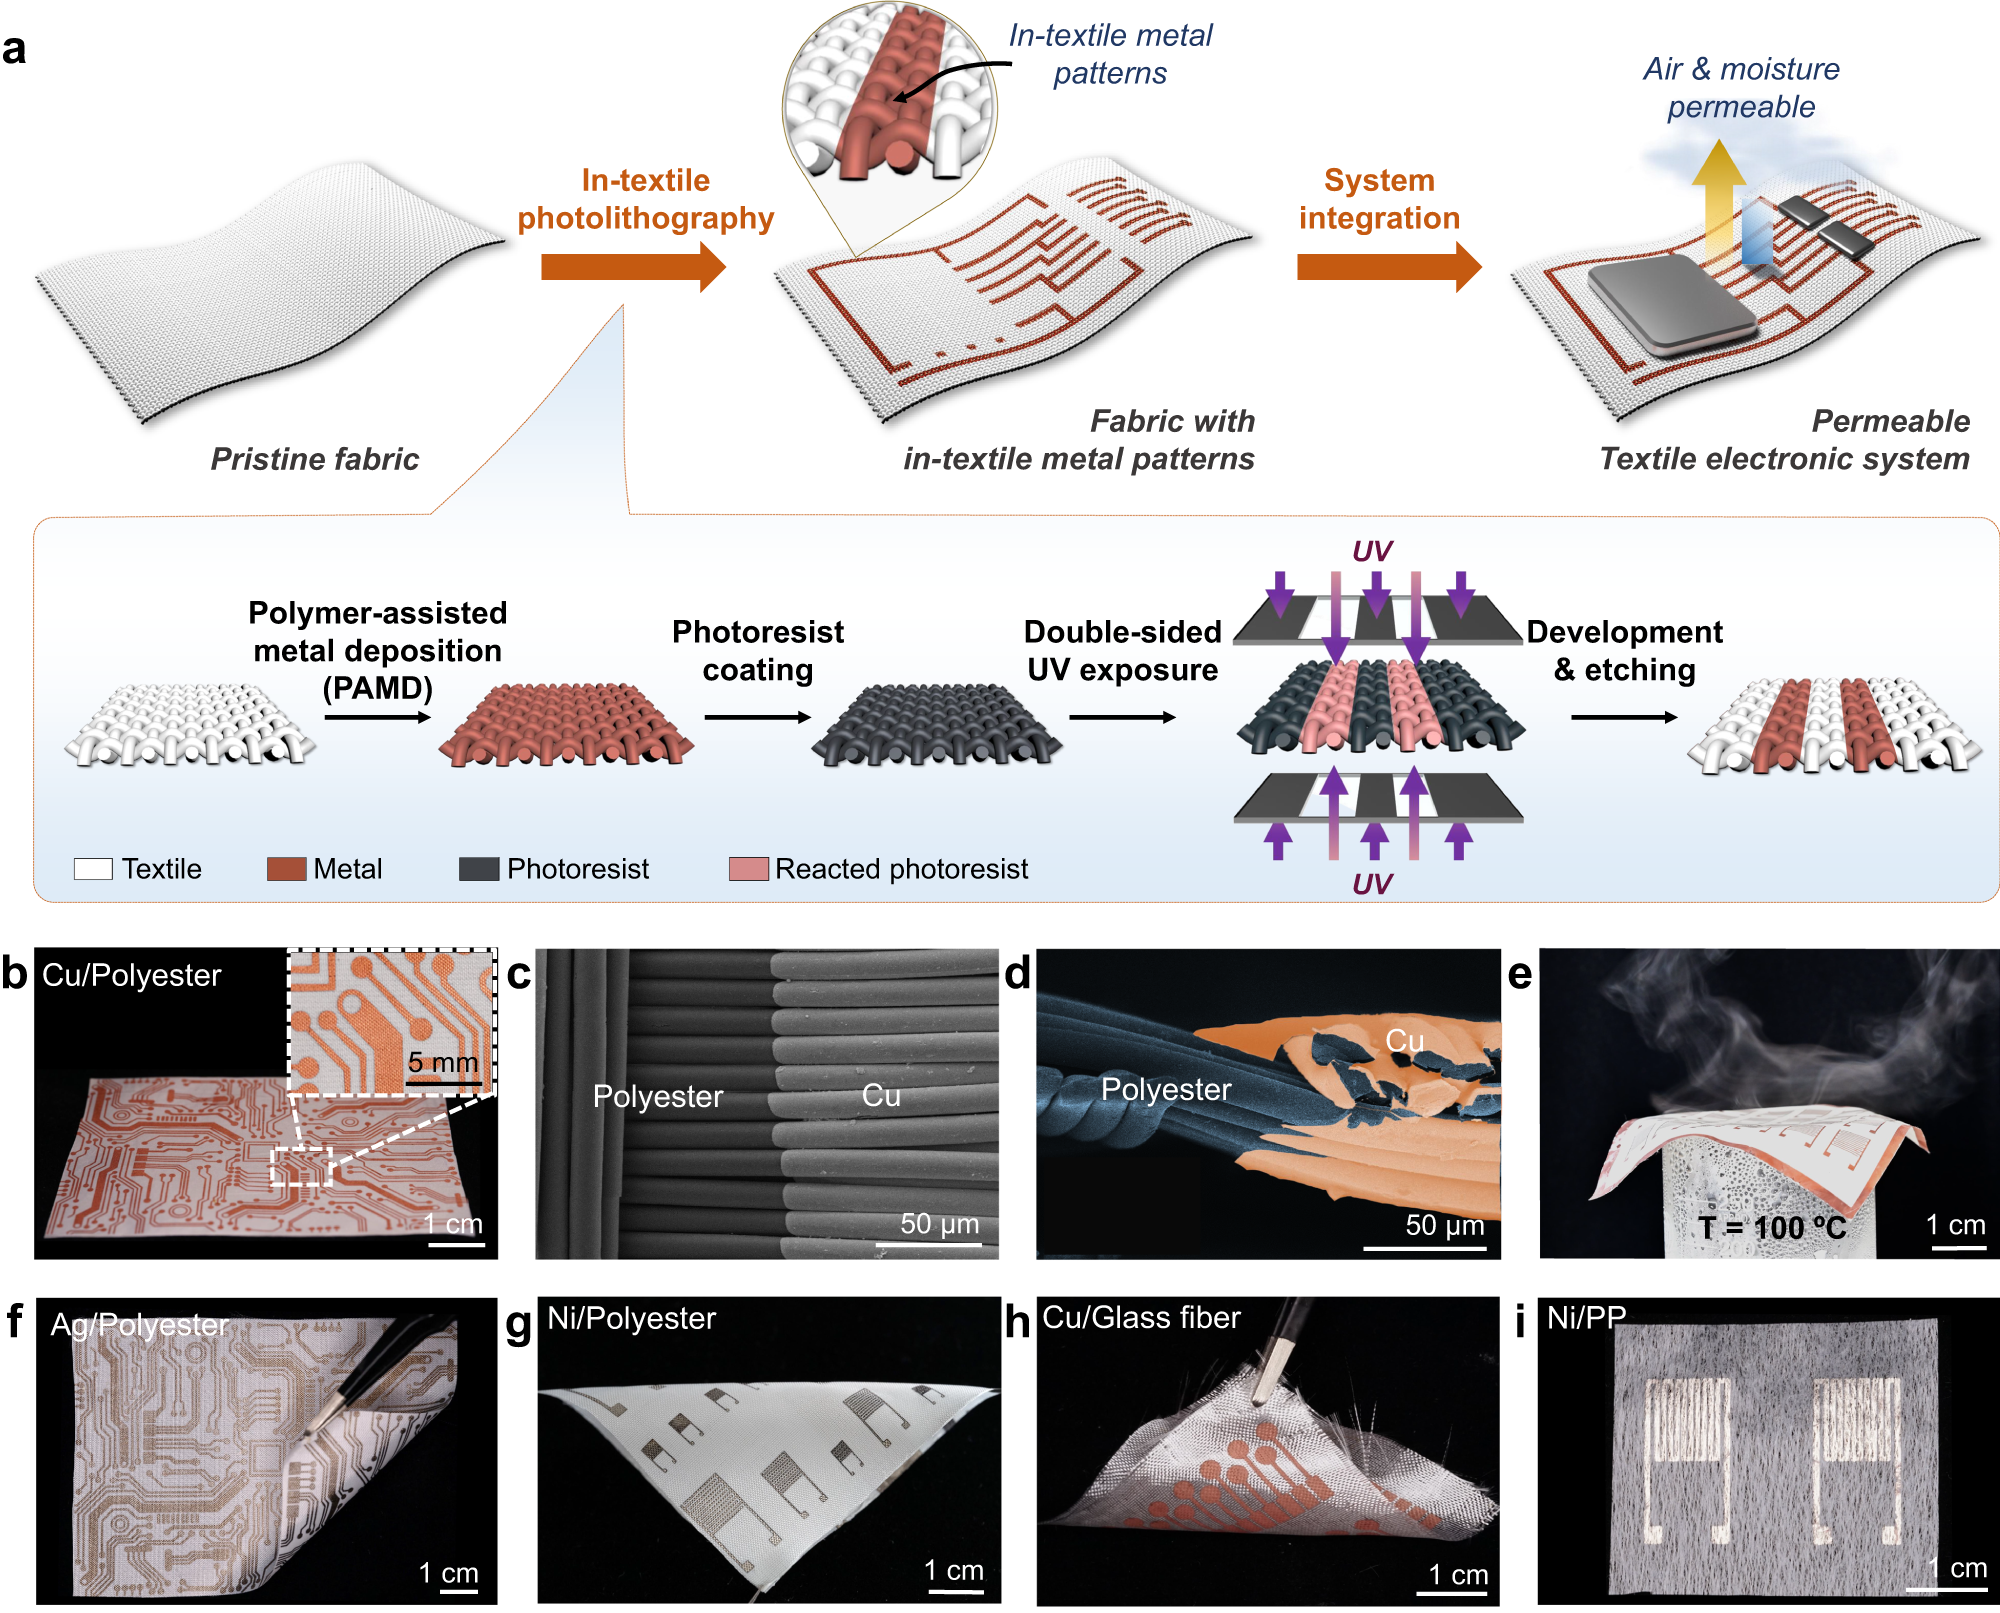 Well-defined in-textile photolithography towards permeable textile